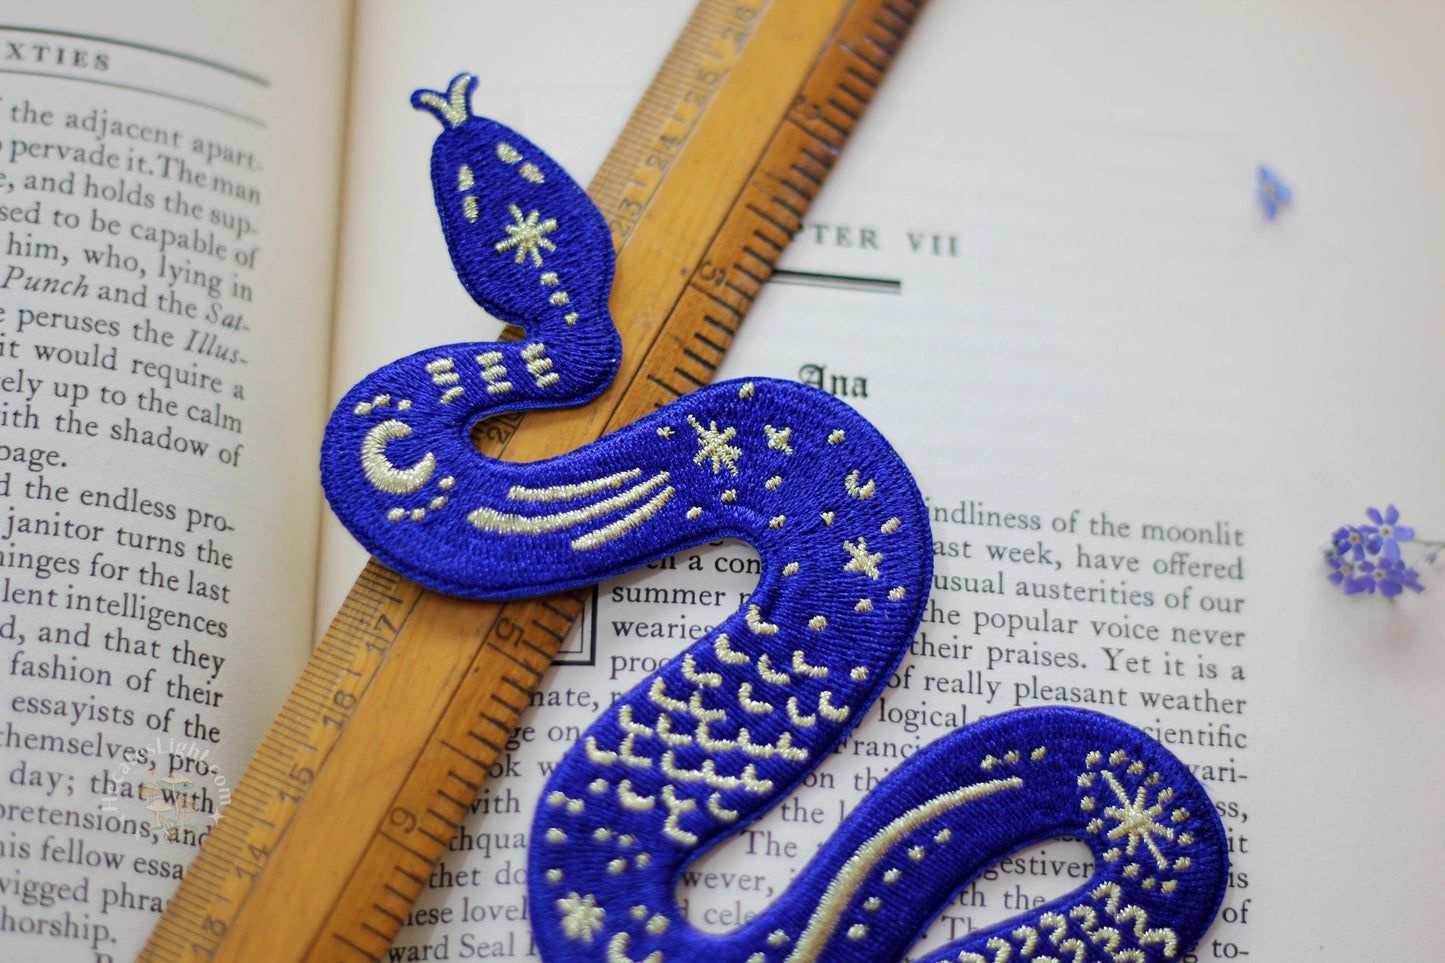 Blue & Gold Serpent Patch MALICIEUSE accessory, blue, gift, glue, gold, iron, iron-on, kundalini, patch, serpent, snake, teenage, teenage witch, witchy, clothing, witchy gift metaphysical occult supplies witchy hecateslight.com witchcraft cottagecore witch gifts